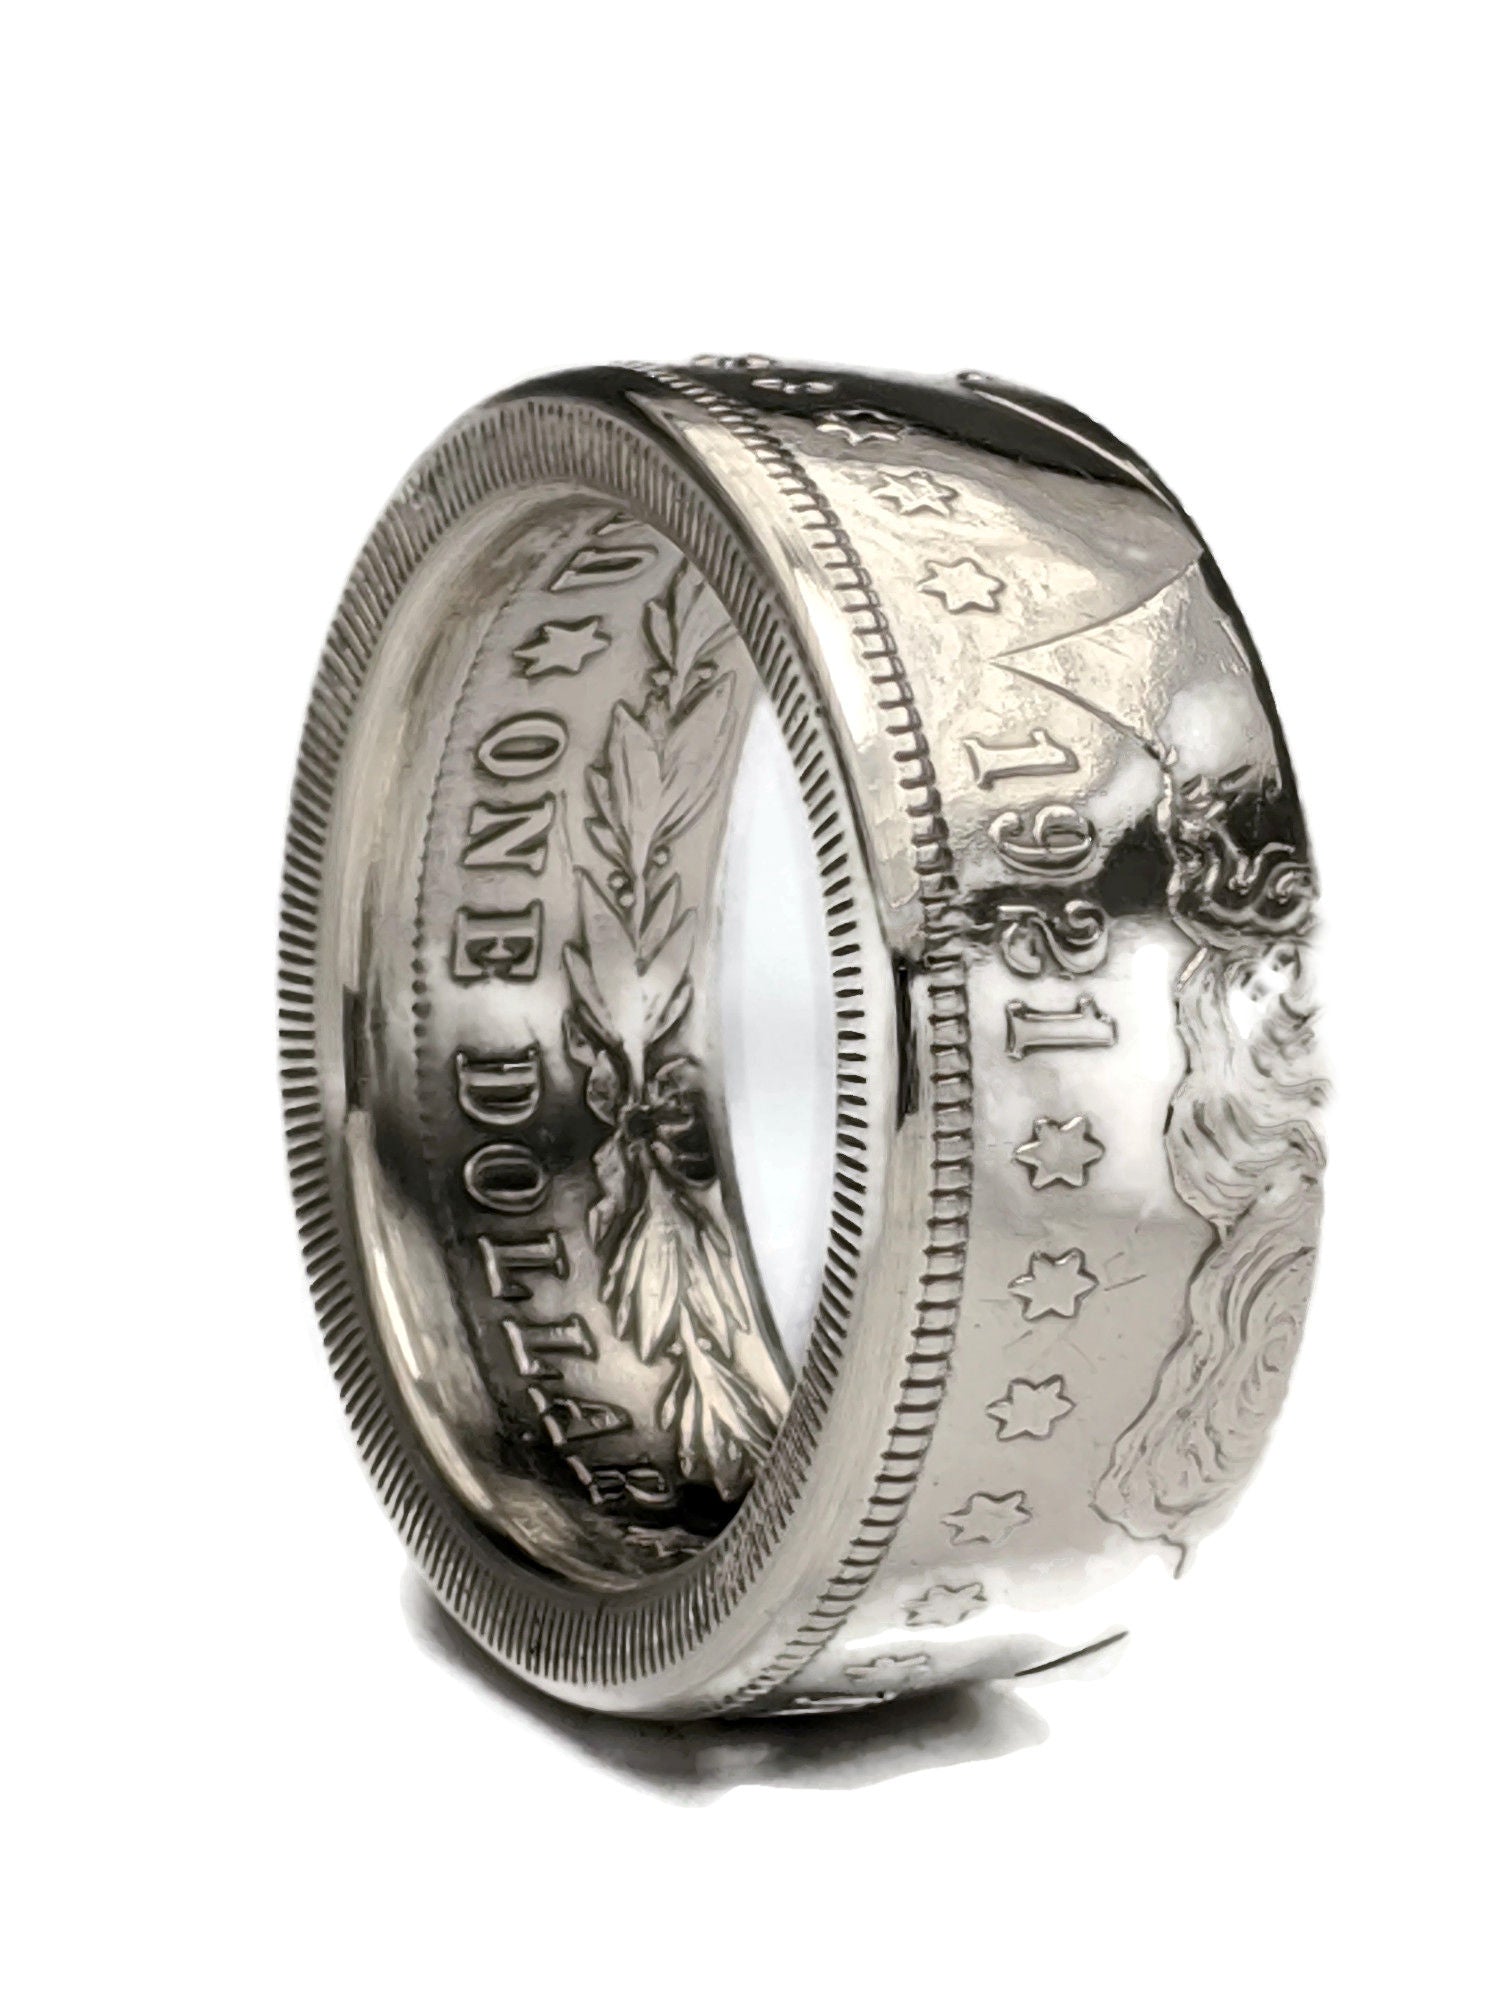 Silver Morgan Coin Ring Handcrafted From A 90% Silver Morgan American Dollar 